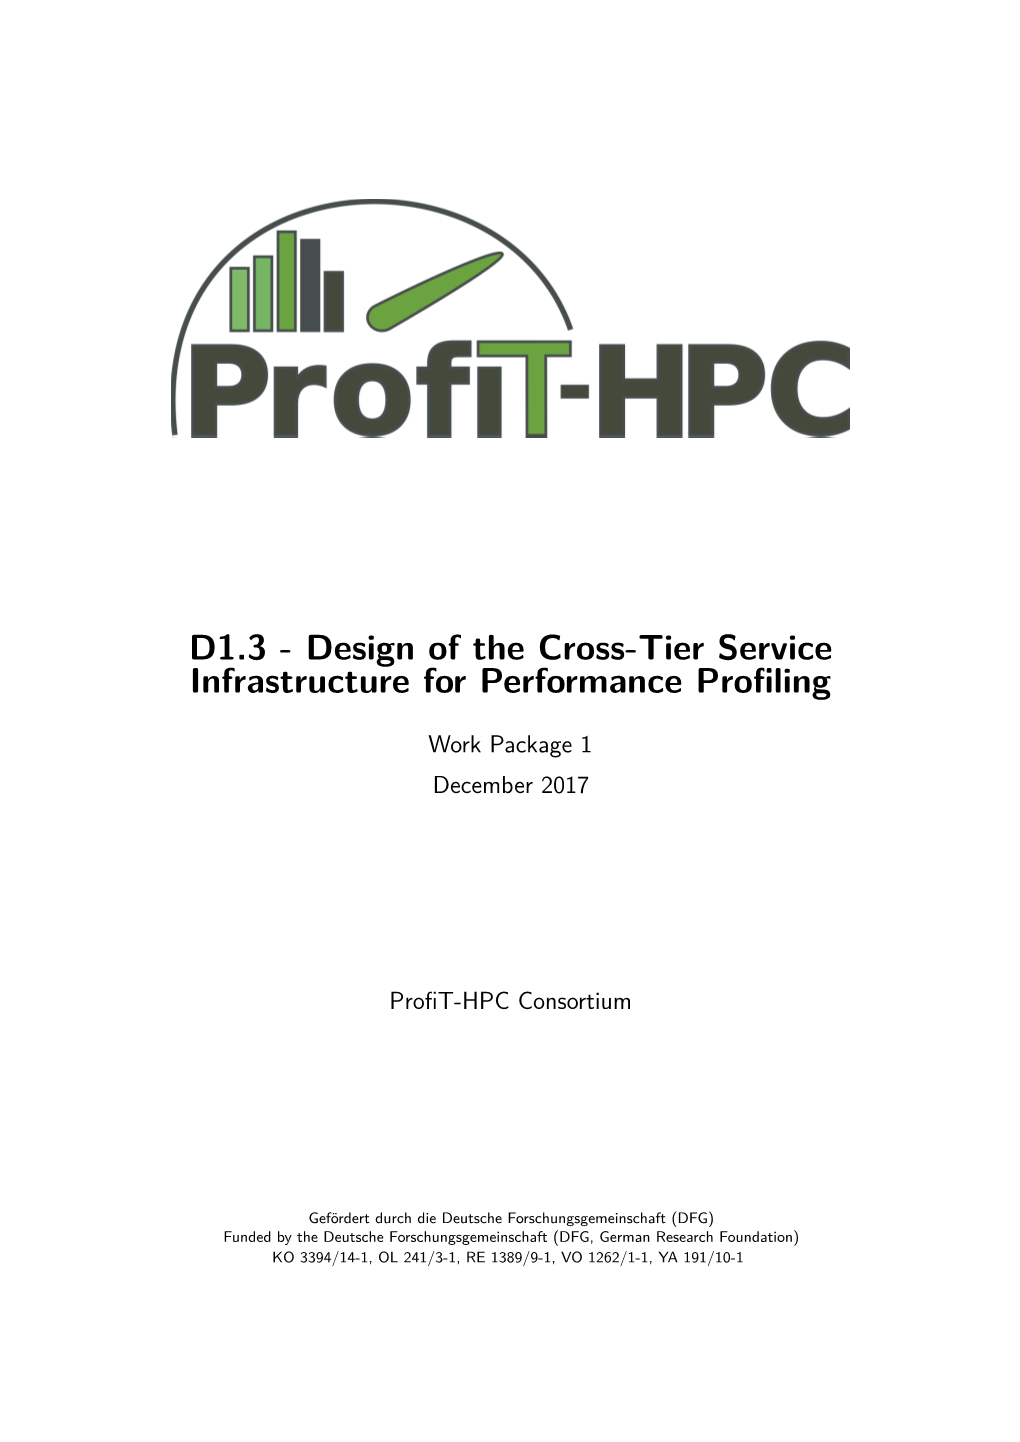 D1.3 - Design of the Cross-Tier Service Infrastructure for Performance Proﬁling